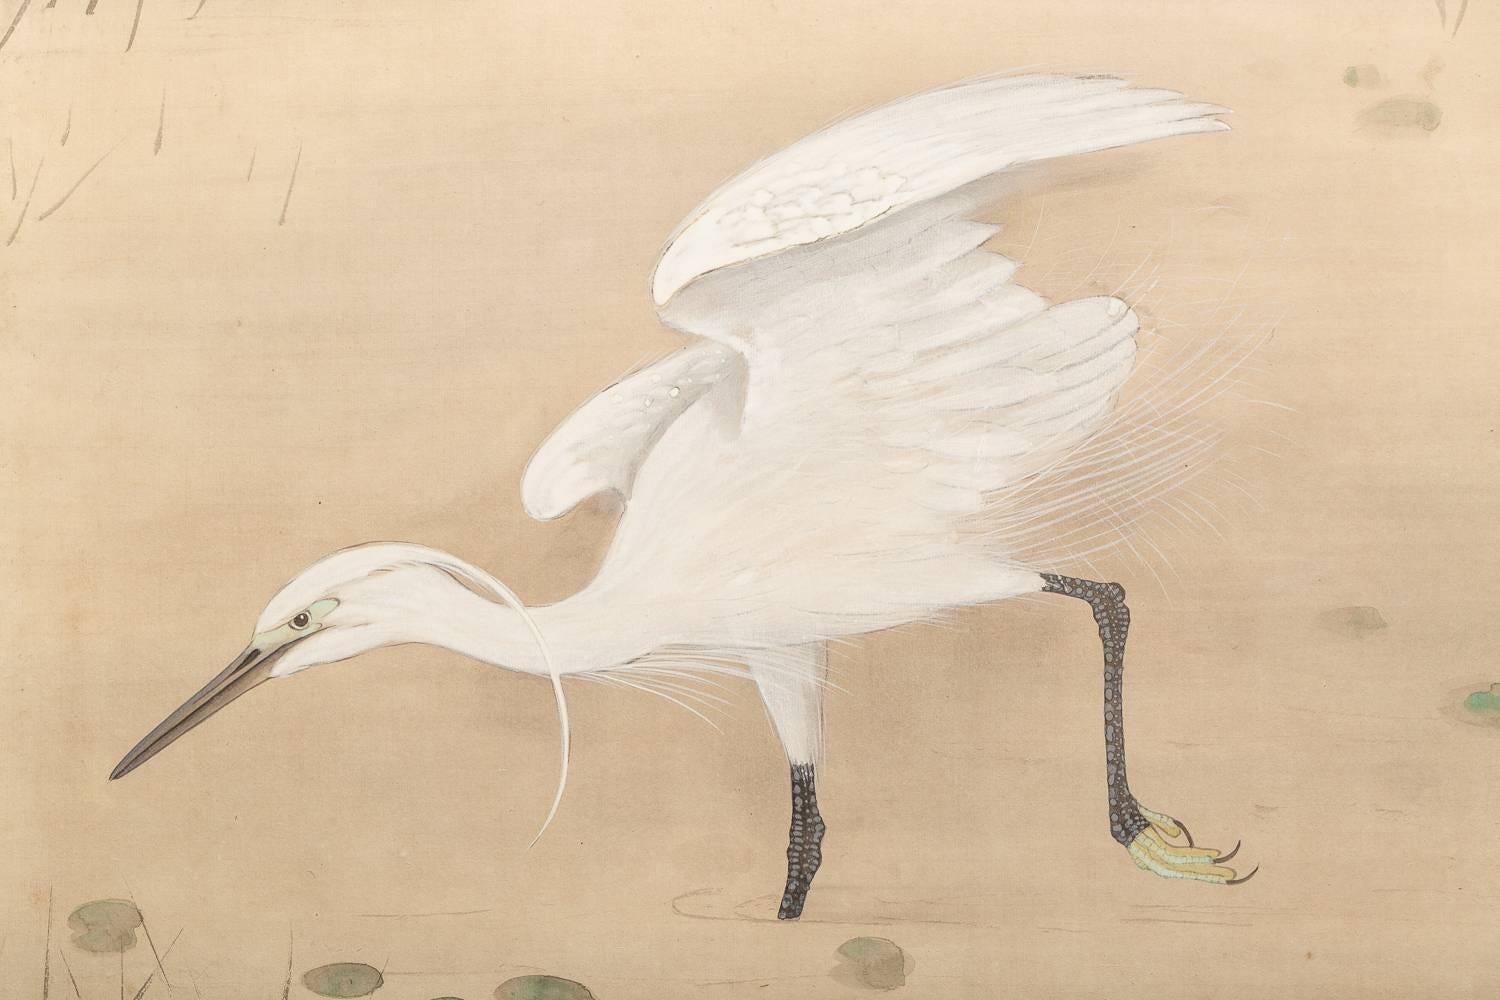 Japanese Screen painted with Heron In Water Lily Pond Under Willow.  Meiji period (1868 - 1912) painting of a heron at pond's edge.  Painted in mineral pigments on mulberry paper.  Artist's seal reads: Yoshi Take / Houshou.  One of a pair with